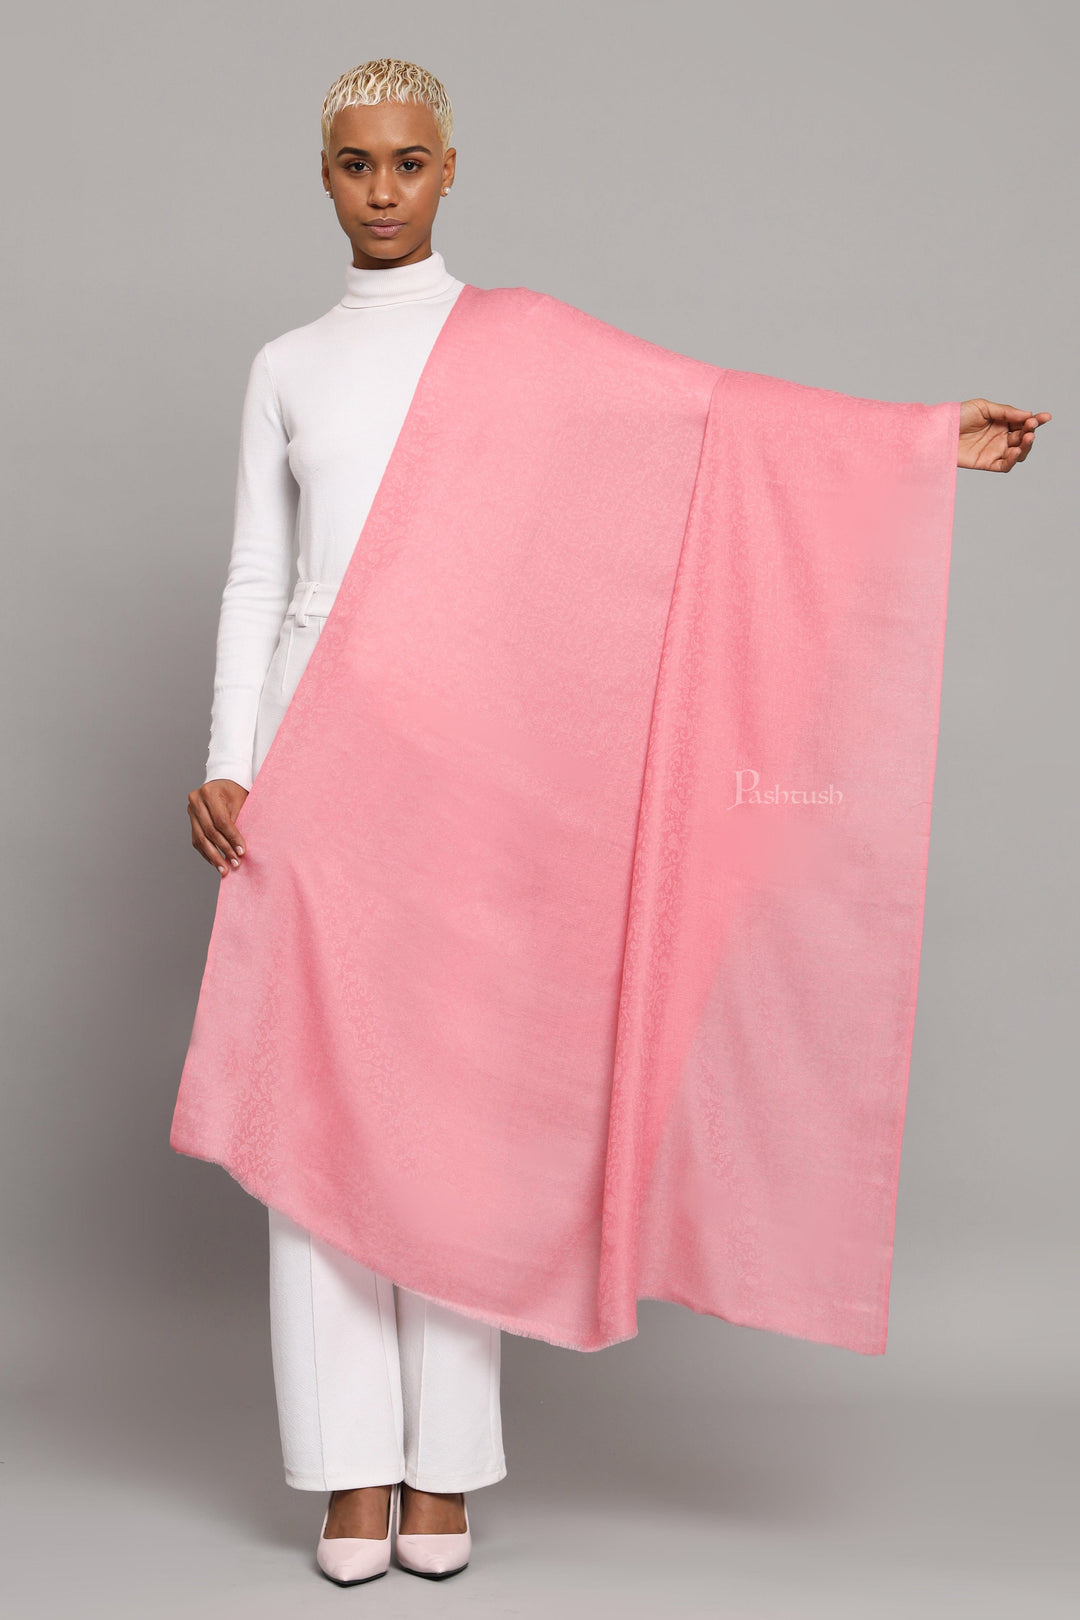 Pashtush India Womens Shawls Pashtush Womens Shawl, Extra Fine Wool, With Paisely Weave, Woven Design, Morning Pink